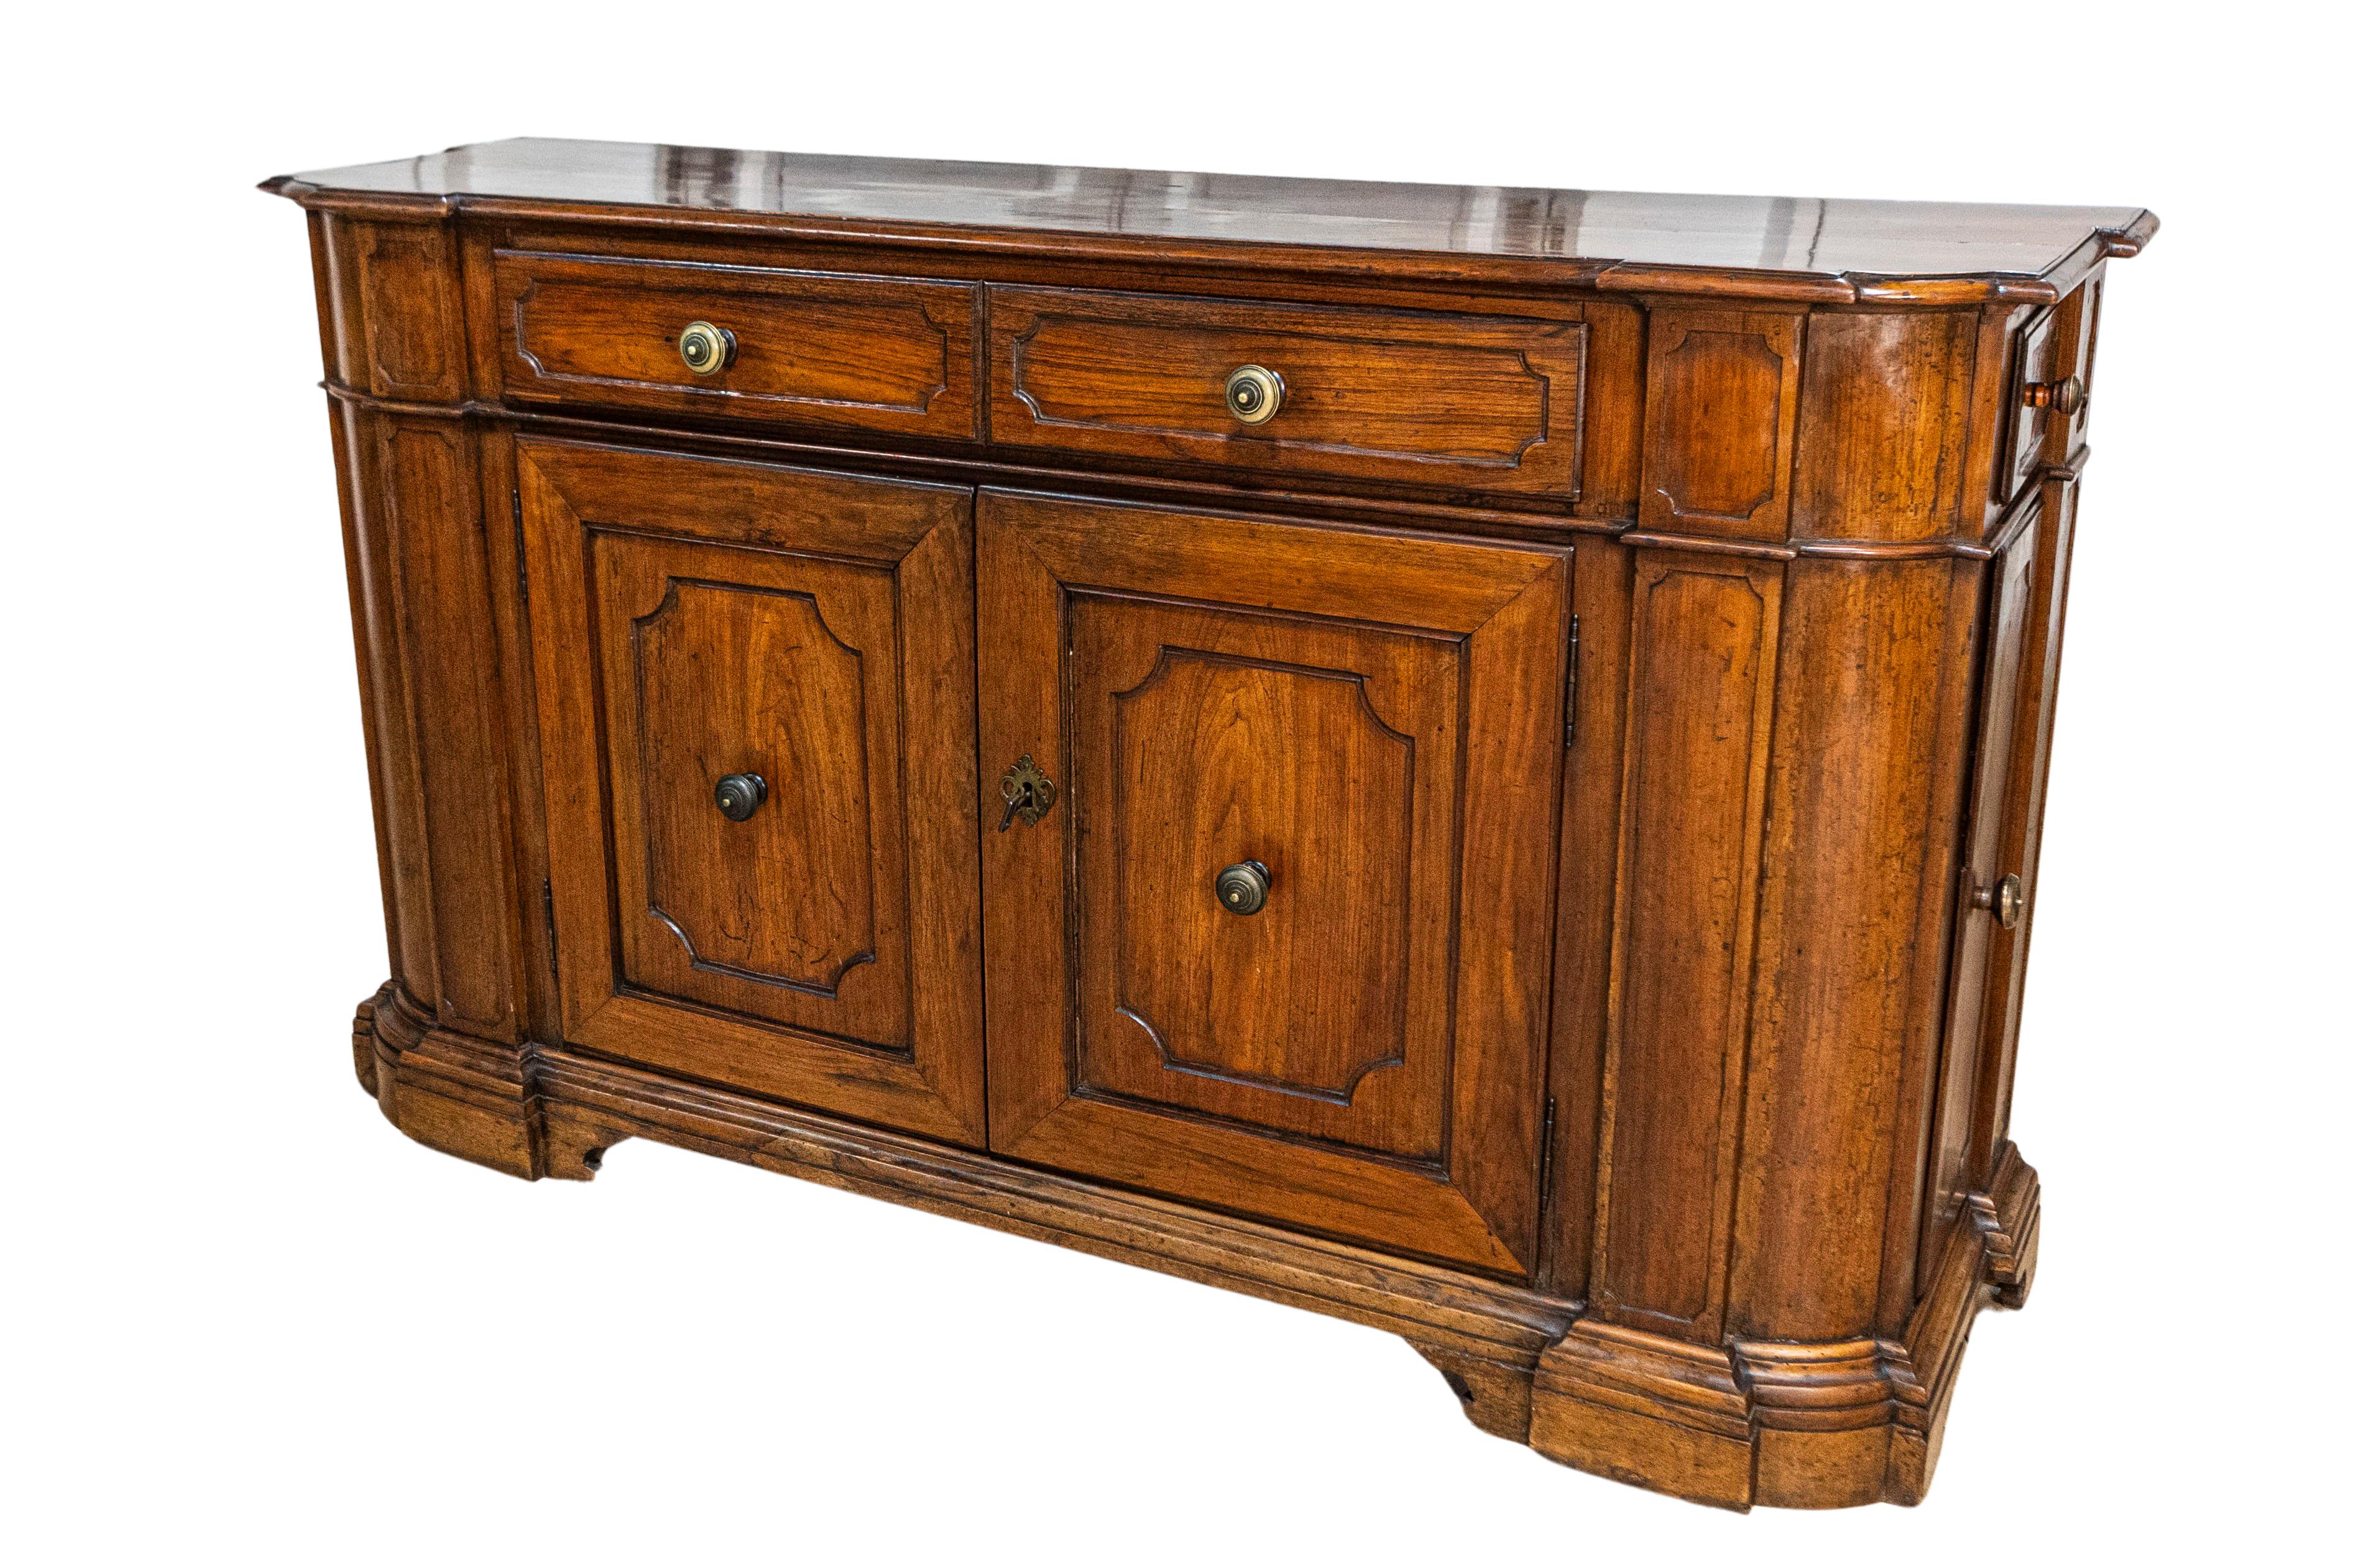 Baroque Italian 1700s Walnut Credenza with Four Drawers, Four Doors and Pilasters For Sale